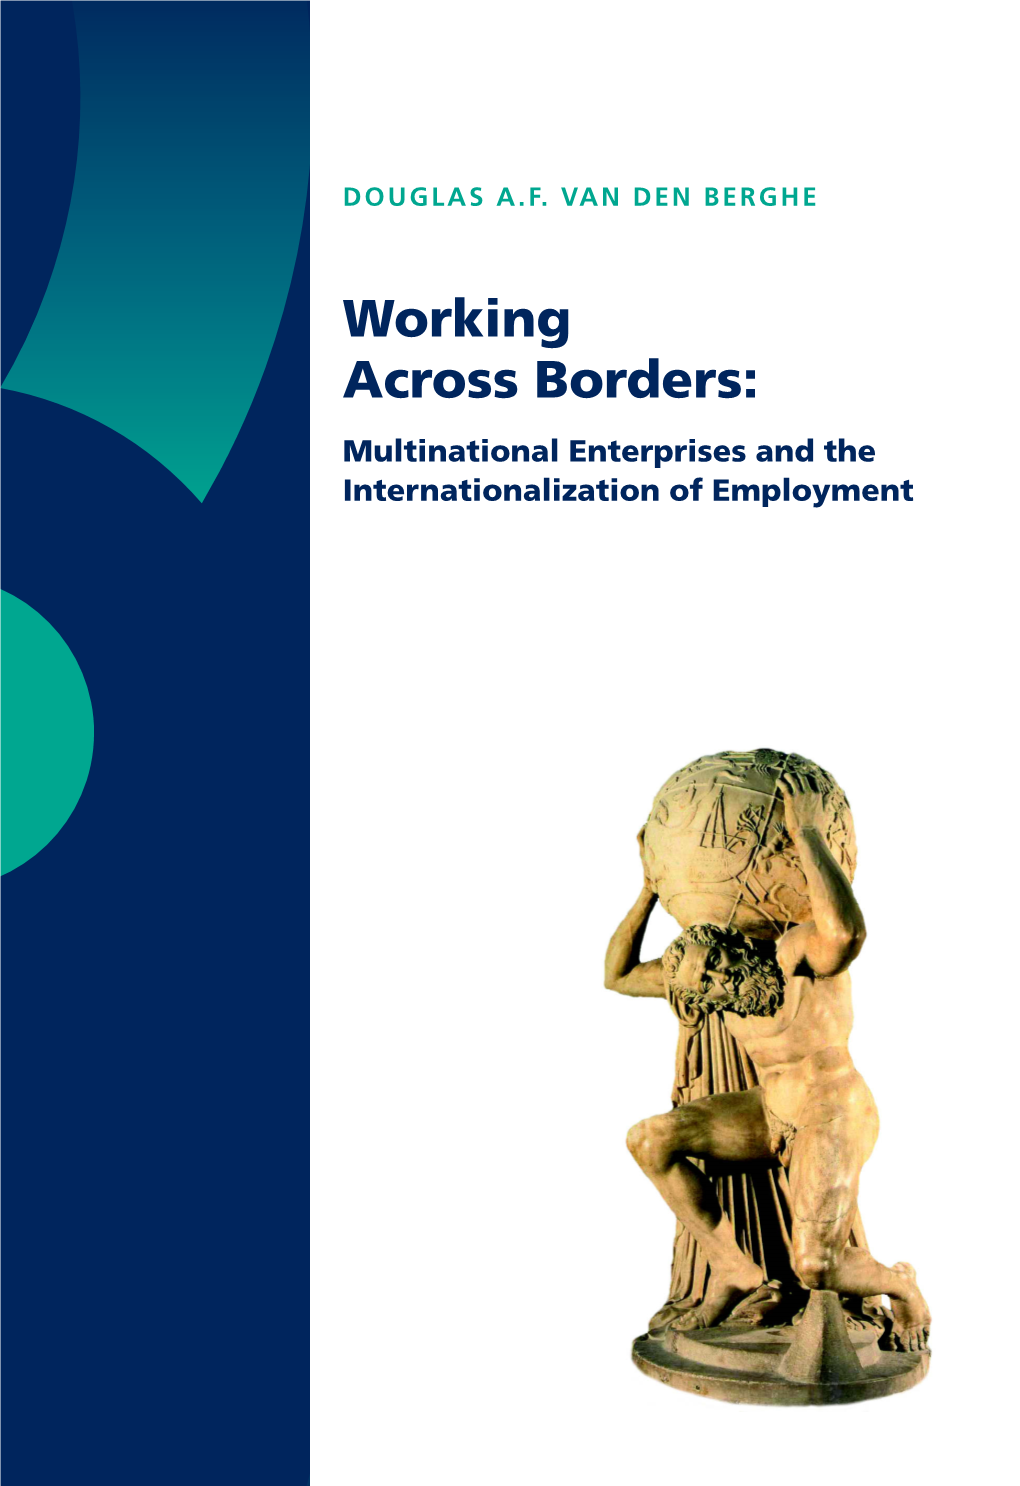 Working Across Borders: Multinational Enterprises and the Internationalization of Employment 29 DOUGLAS A.F